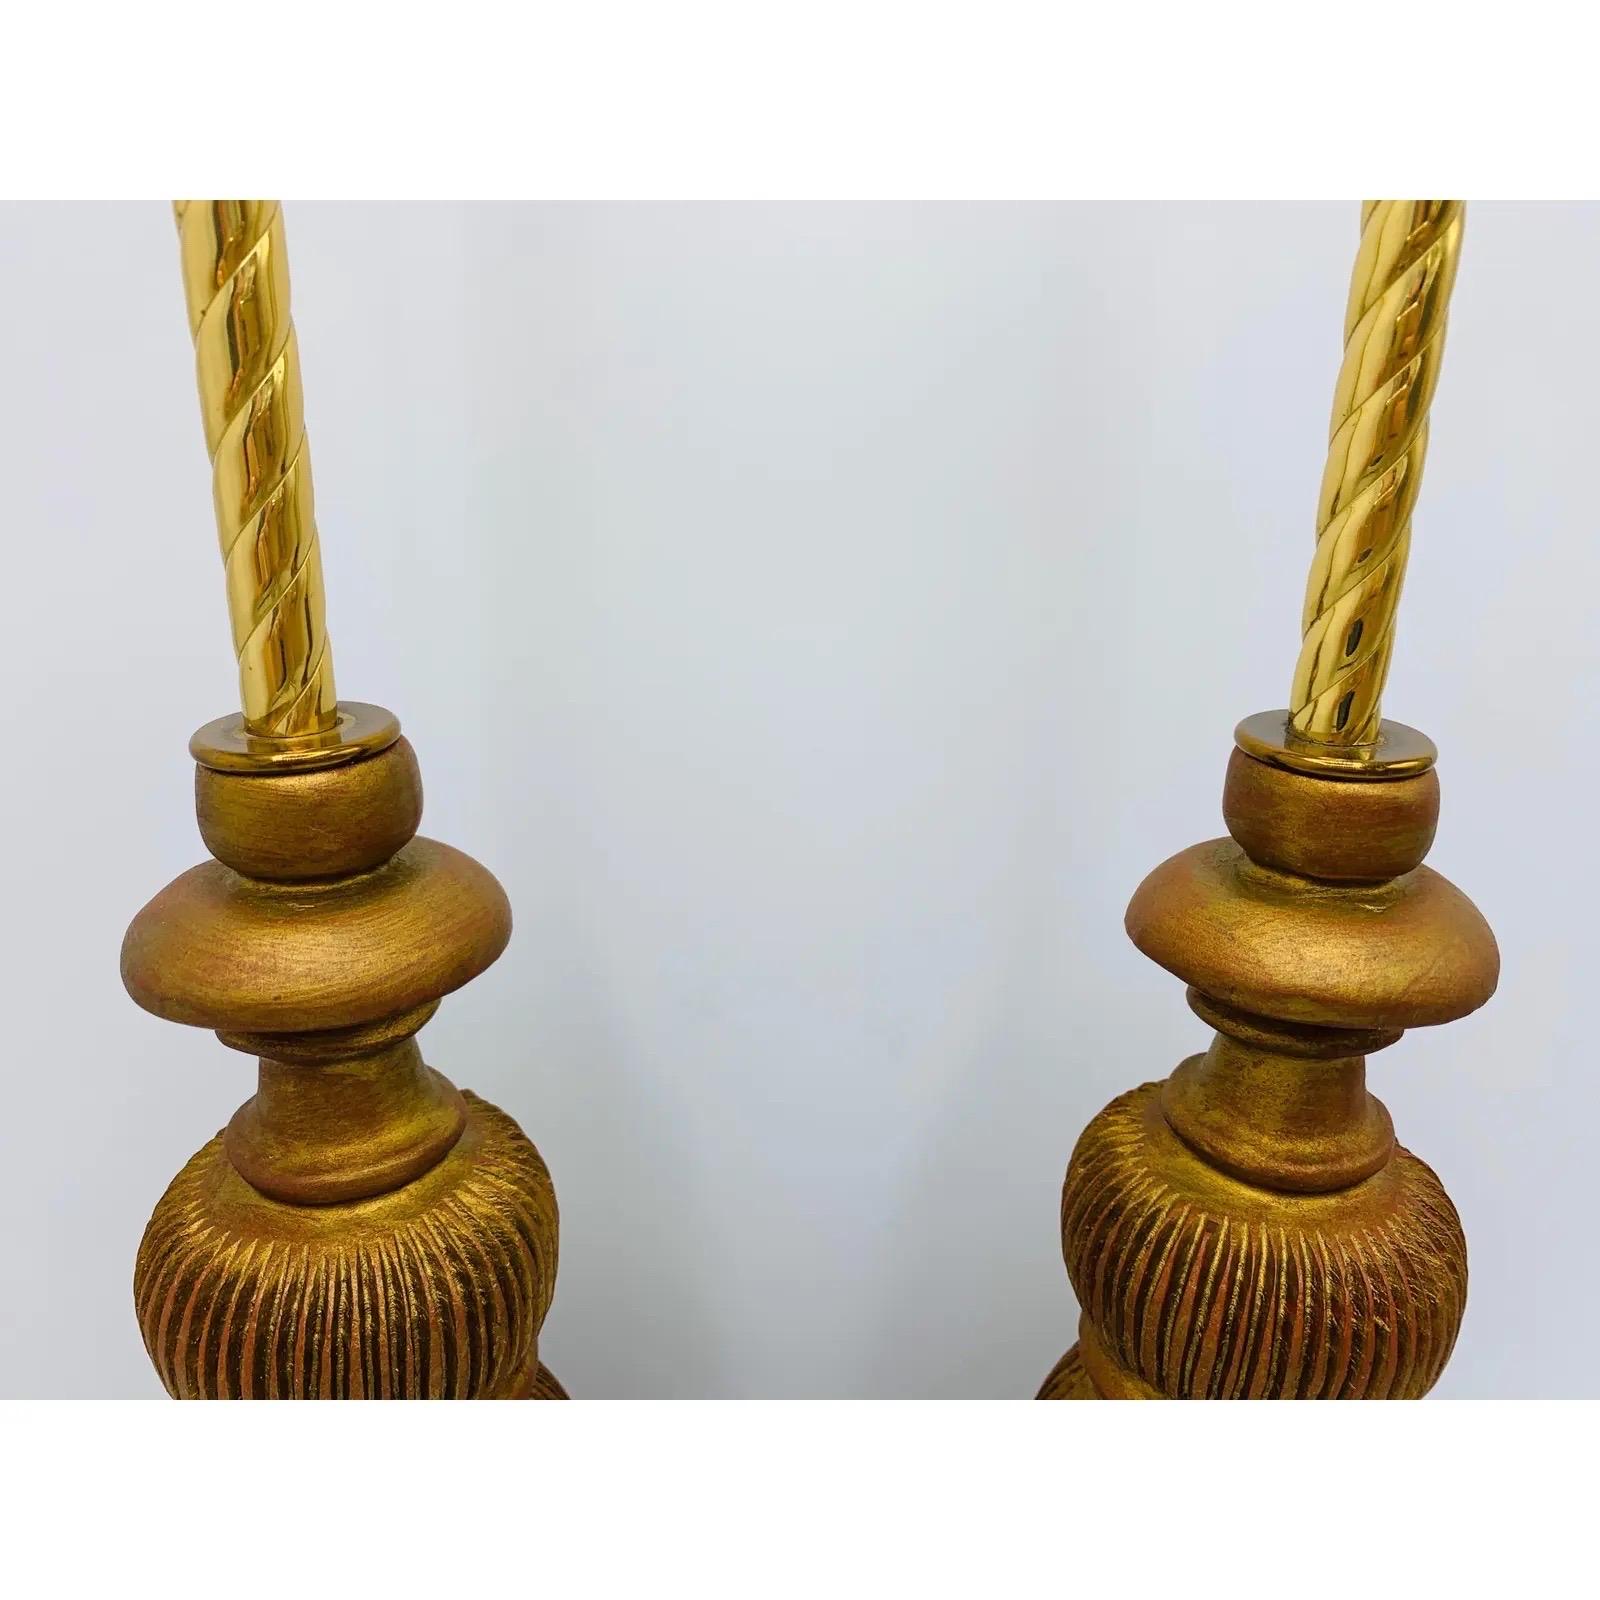 Hand-Carved 1960s Italian Sarreid Giltwood and Brass Tassel Lamps, Pair For Sale